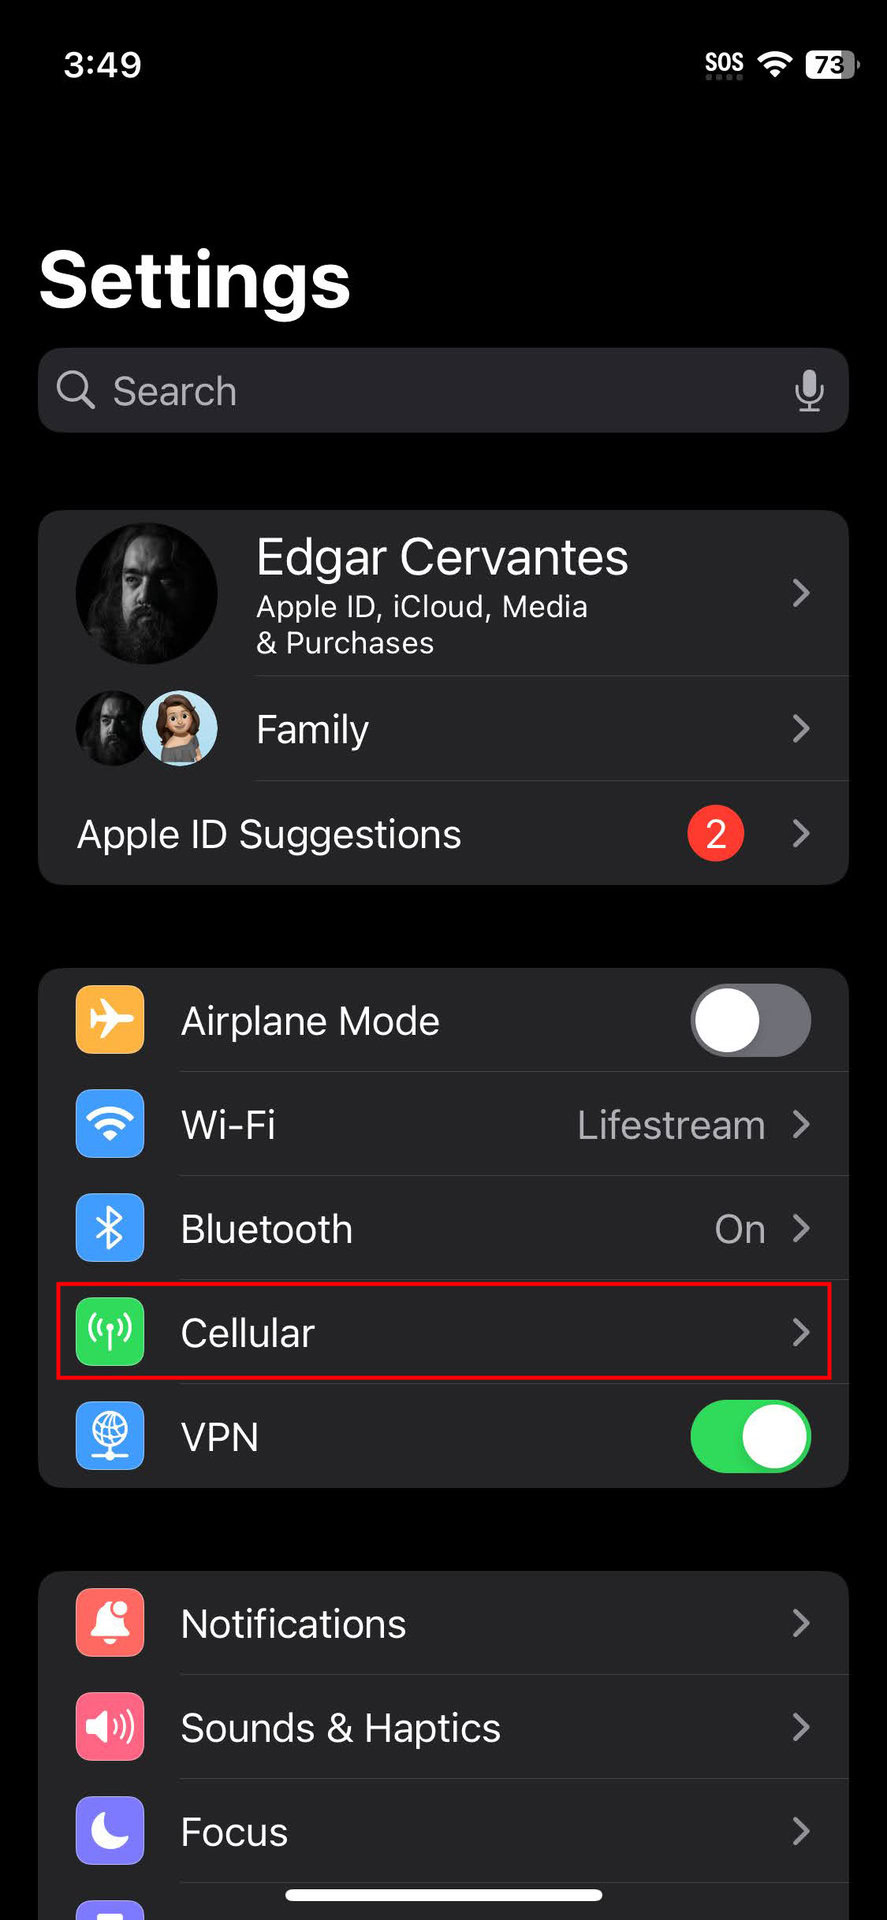 How to activate an iPhone eSIM using a QR code (1)